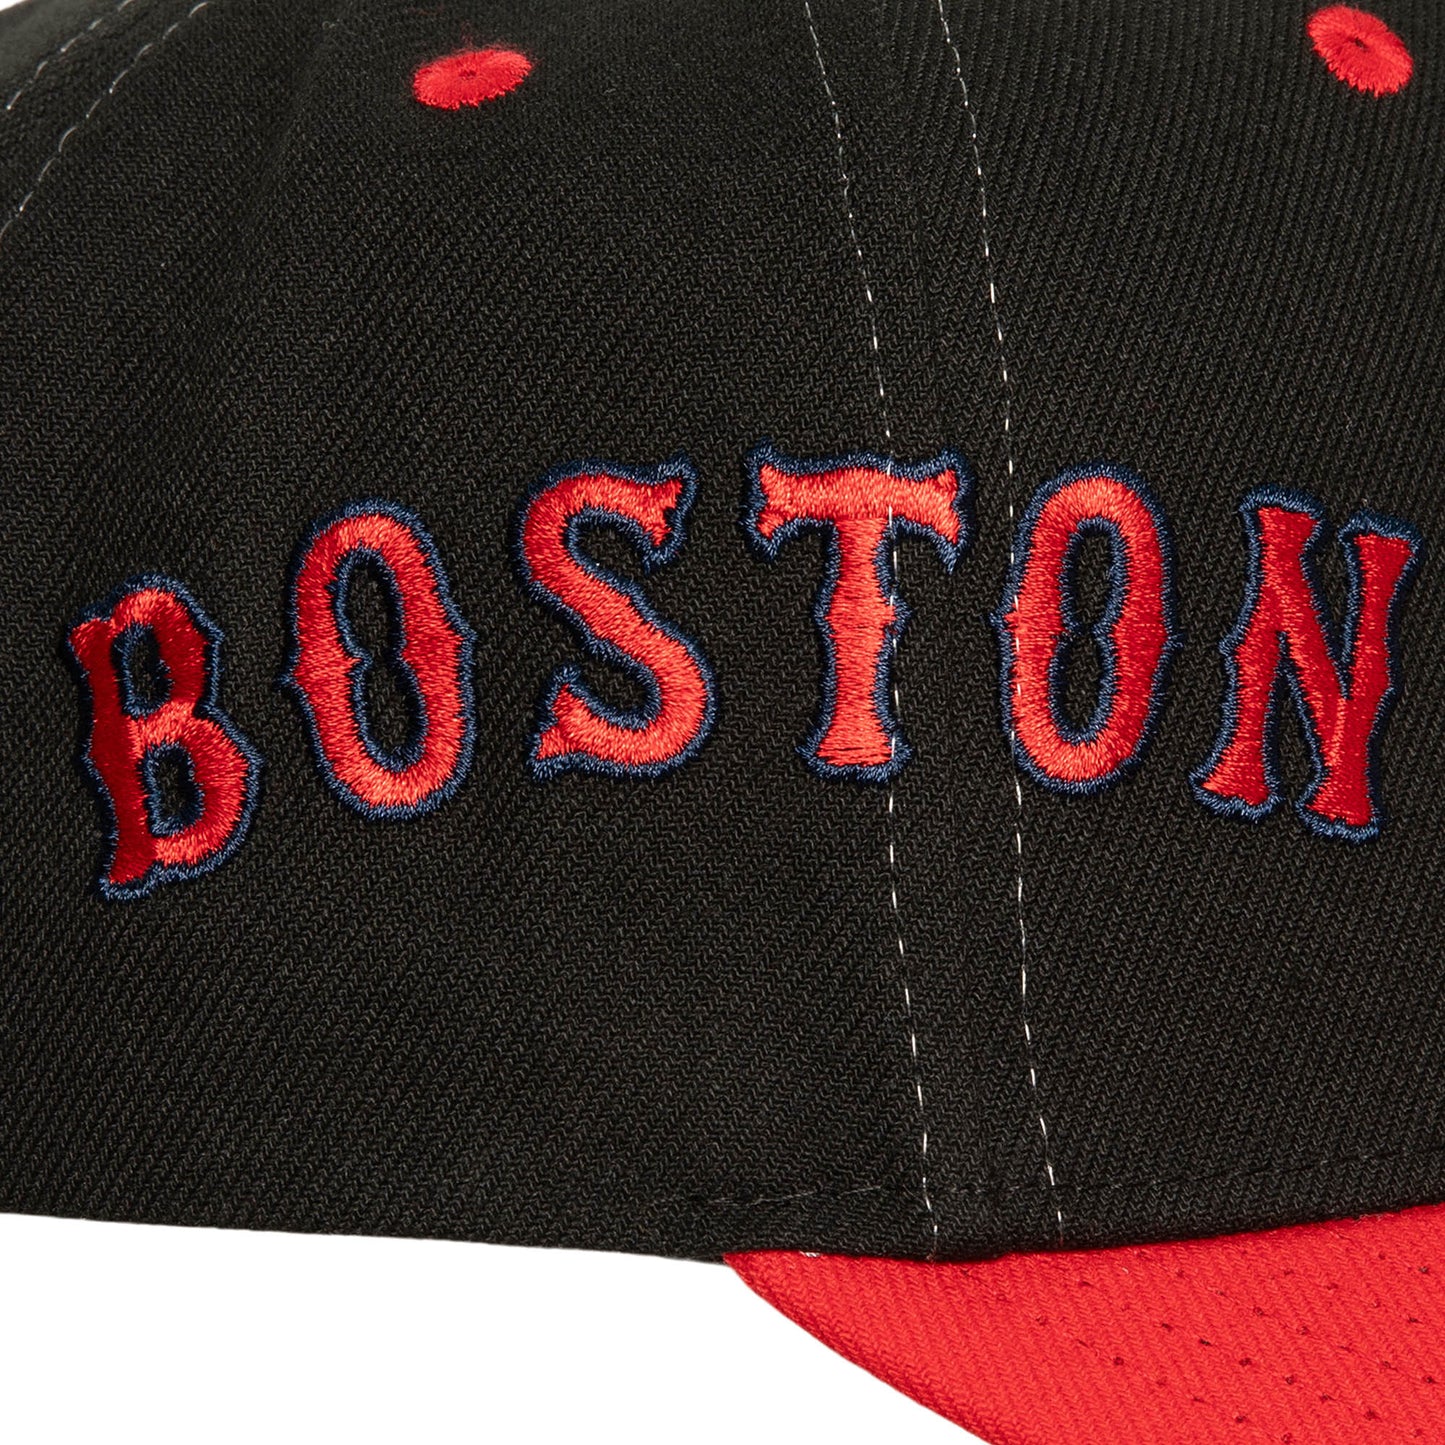 Boston Red Sox Mitchell & Ness Over Bite Pro Crown Snapback Hat